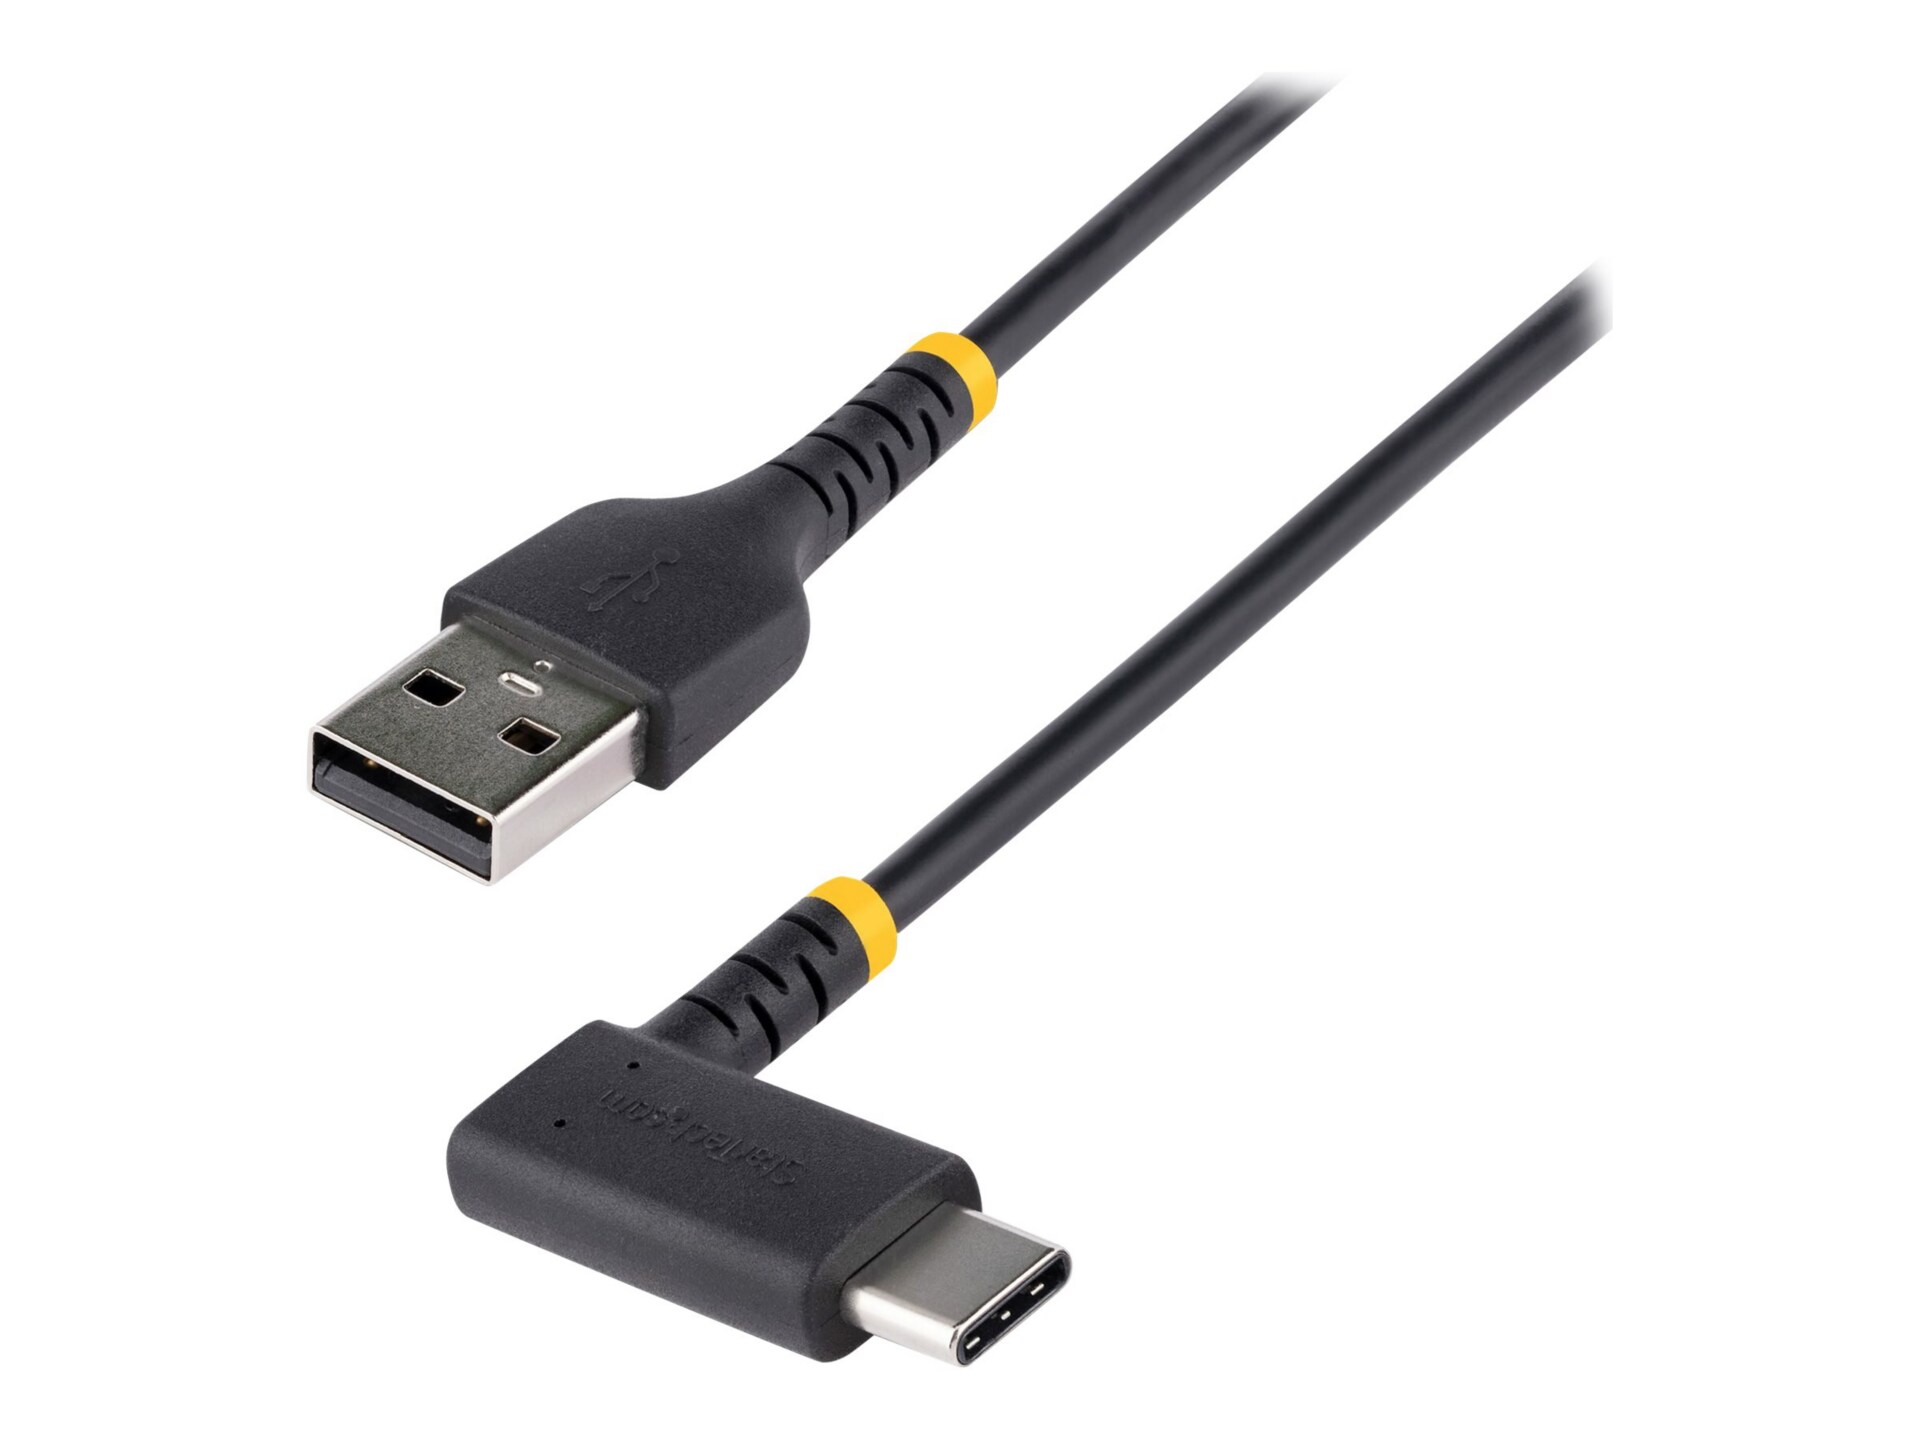 StarTech.com 6tf (2m) USB A to C Charging Cable Right Angle, Heavy Duty Fas